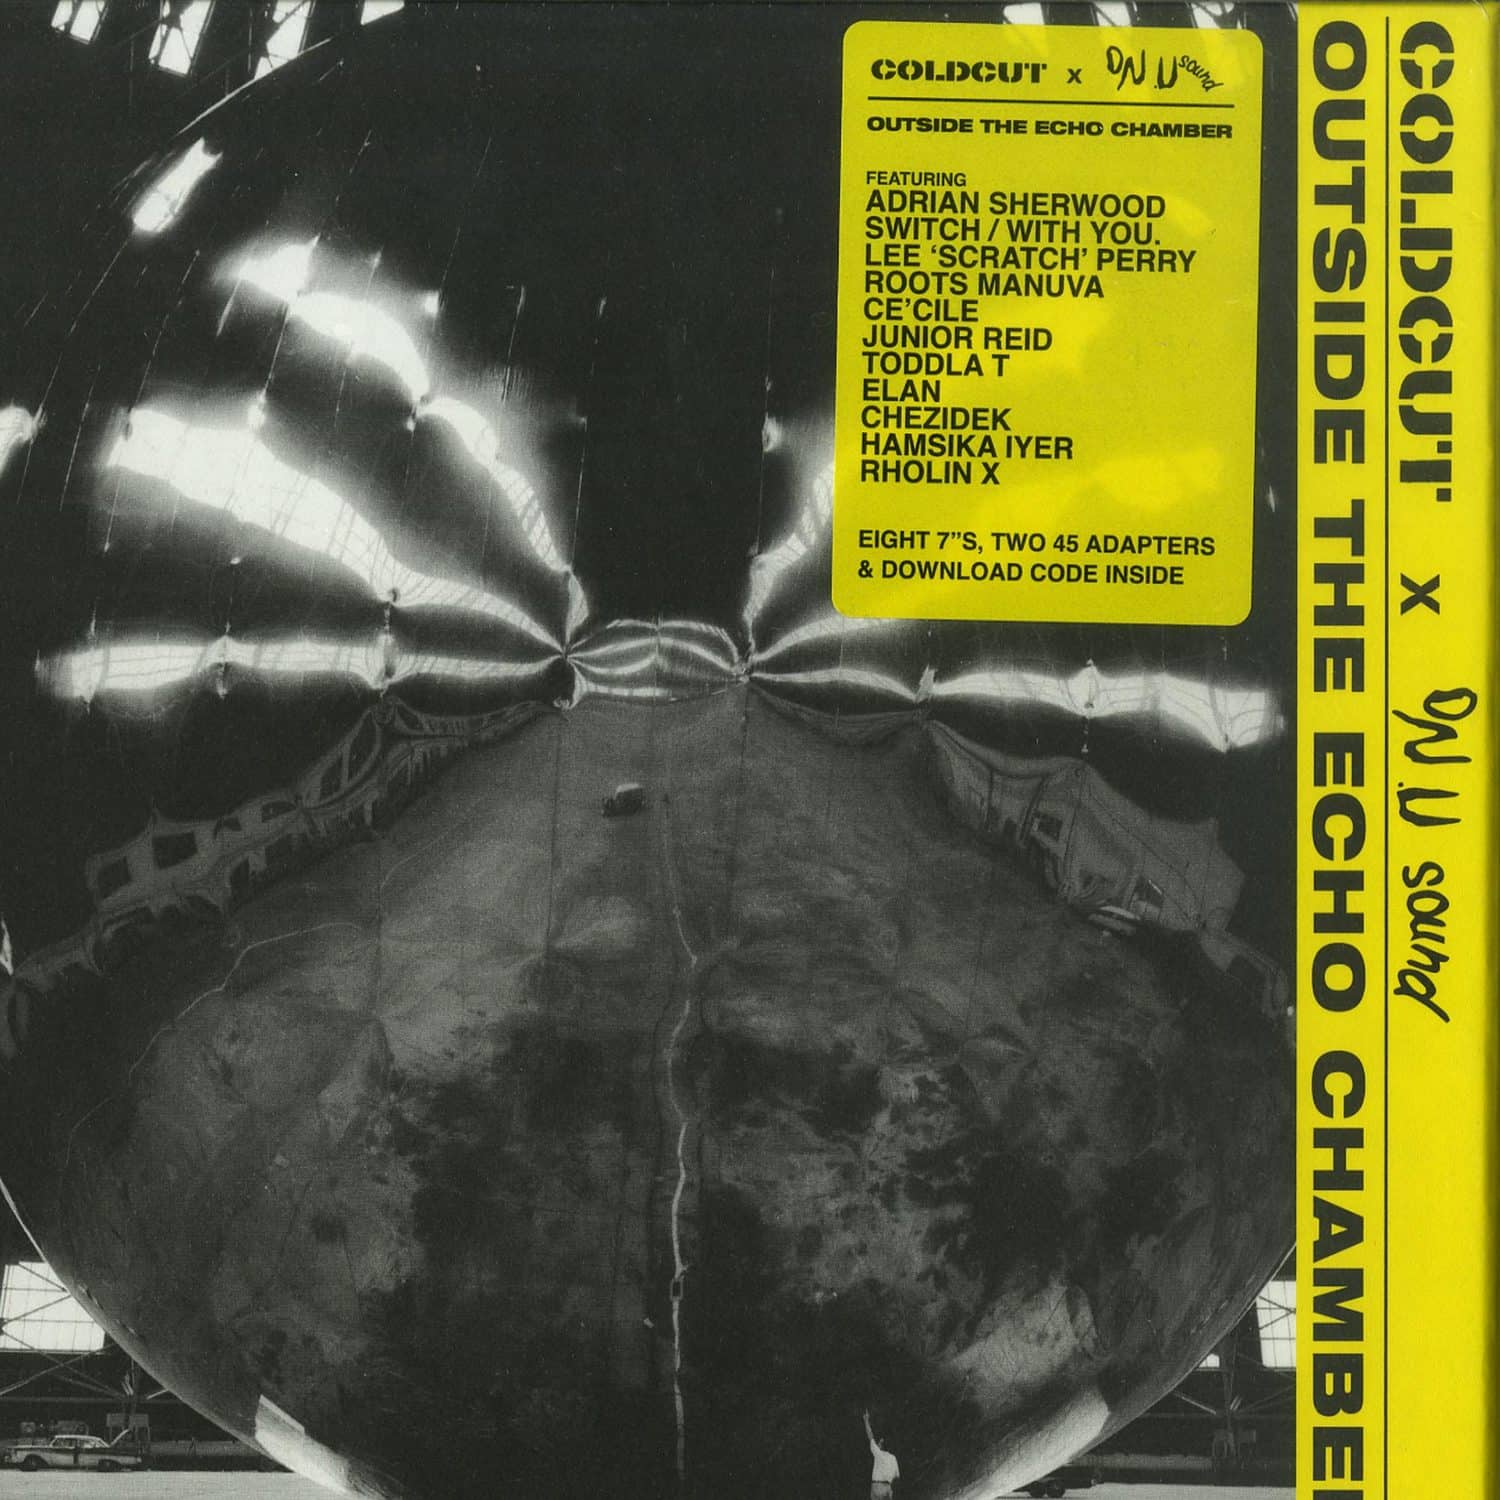 Coldcut X On-U Sound - OUTSIDE THE ECHO CHAMBER 